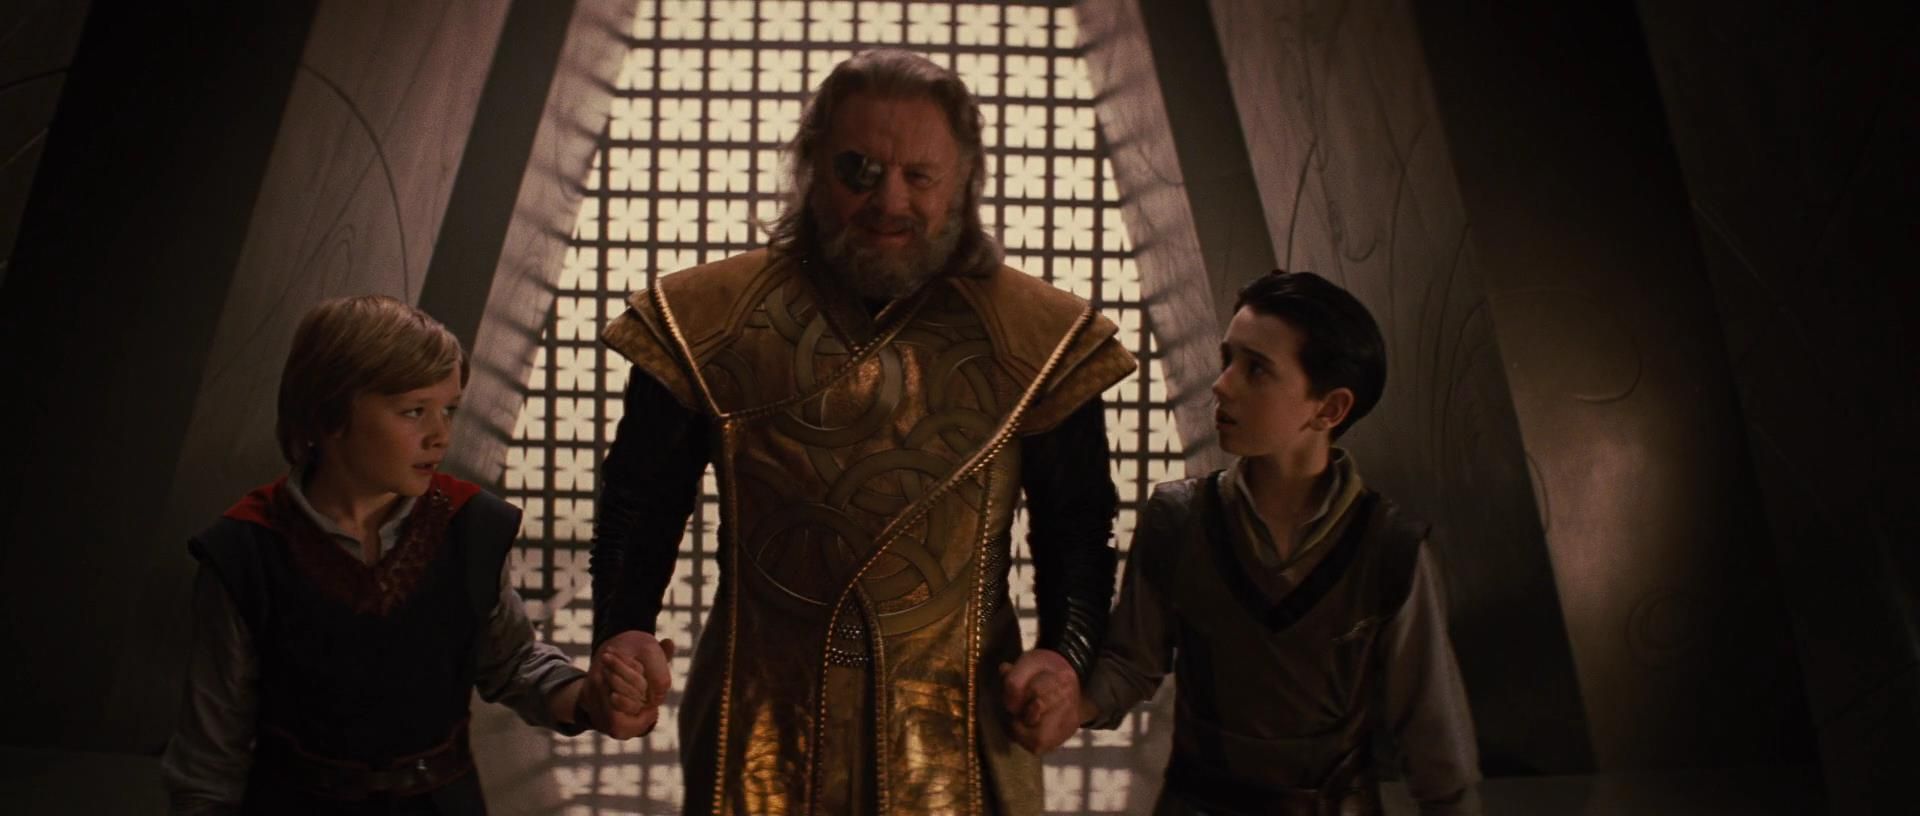 Odin holding hands with Young Thor and Loki